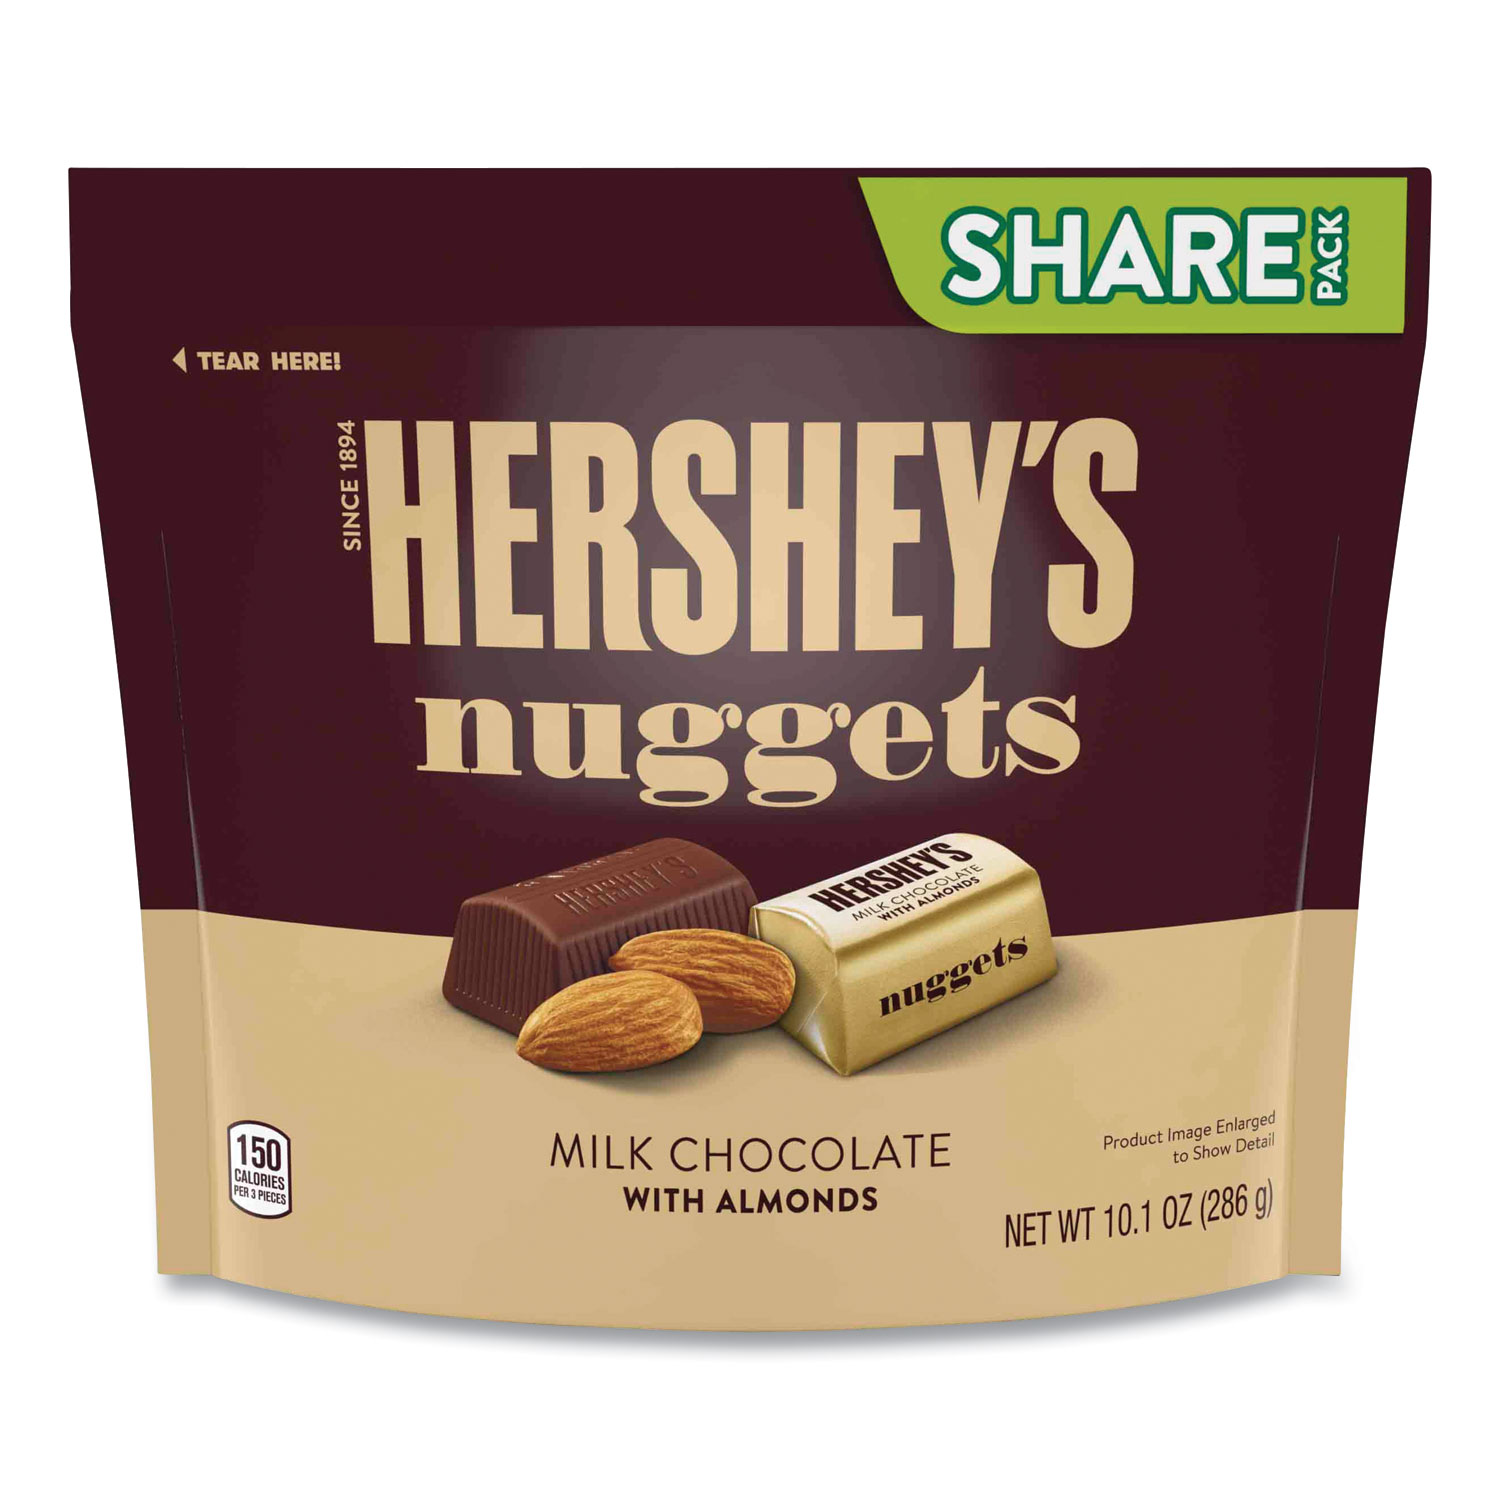  Hershey's 1871 Nuggets Share Pack, Milk Chocolate with Almonds, 10.1 oz Bag, 3/Pack, Free Delivery in 1-4 Business Days (GRR24600442) 